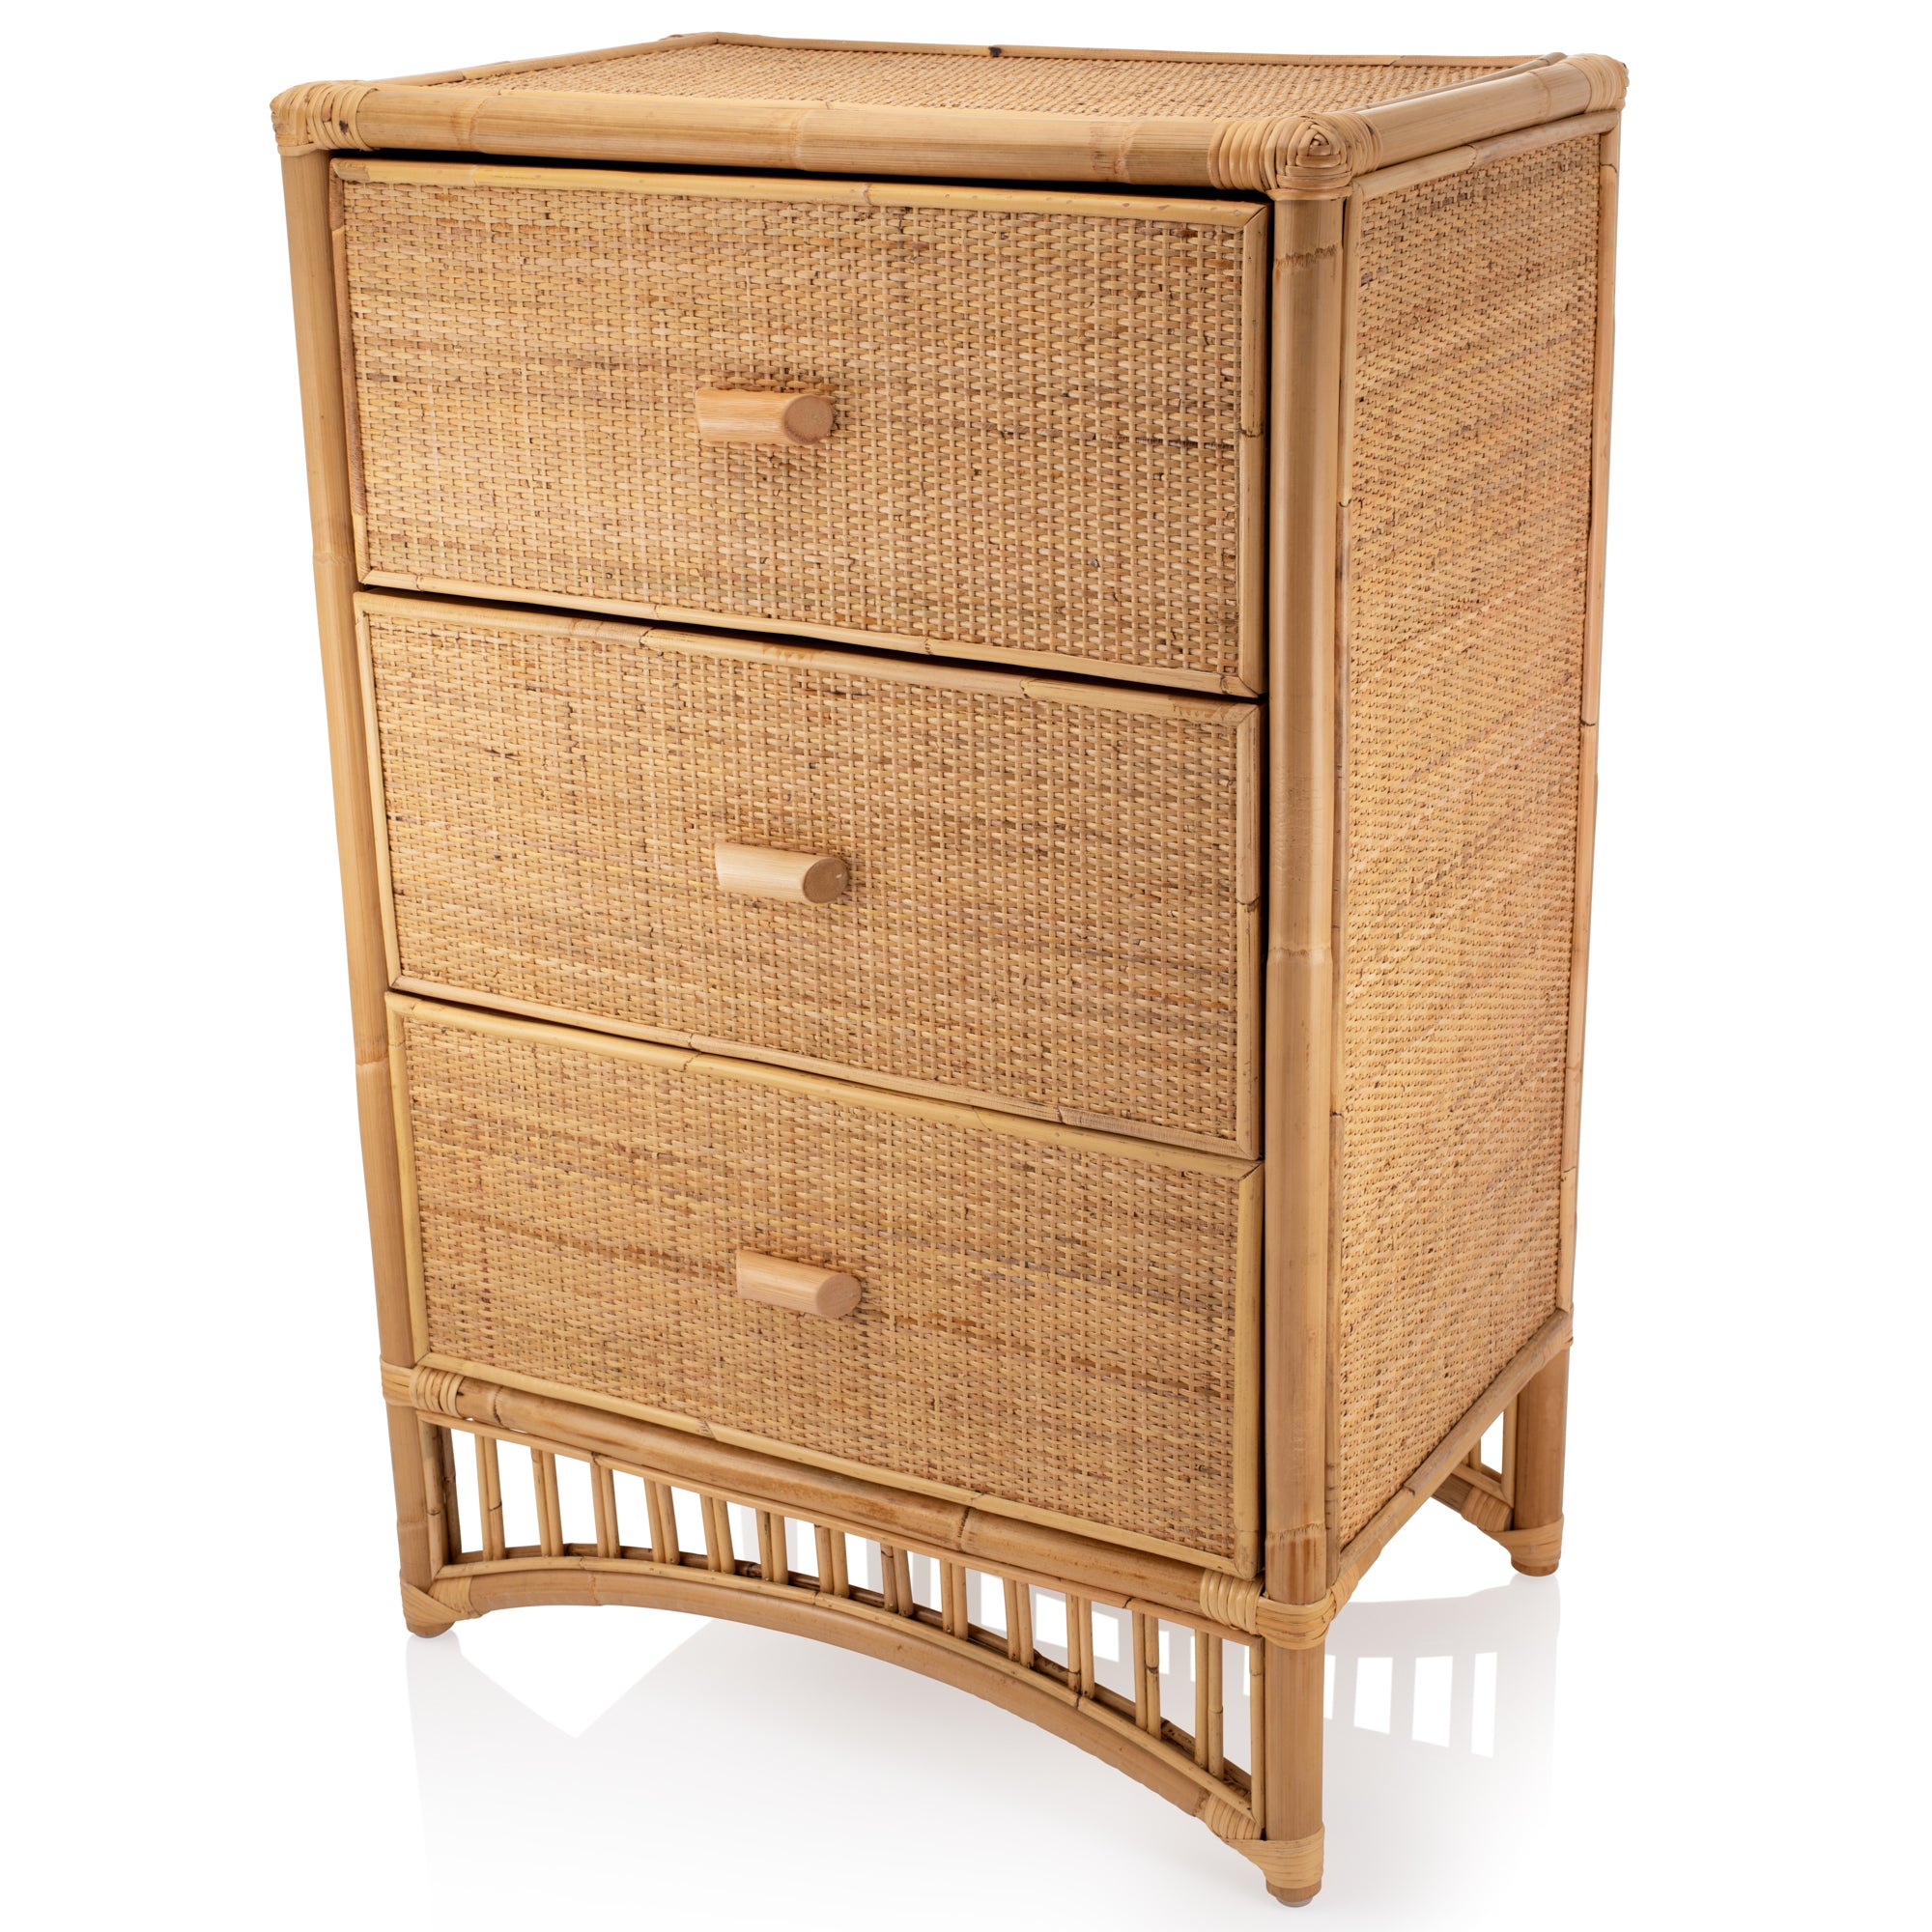 Iris Natural Rattan Chest of 3 drawers - The Rattan Company